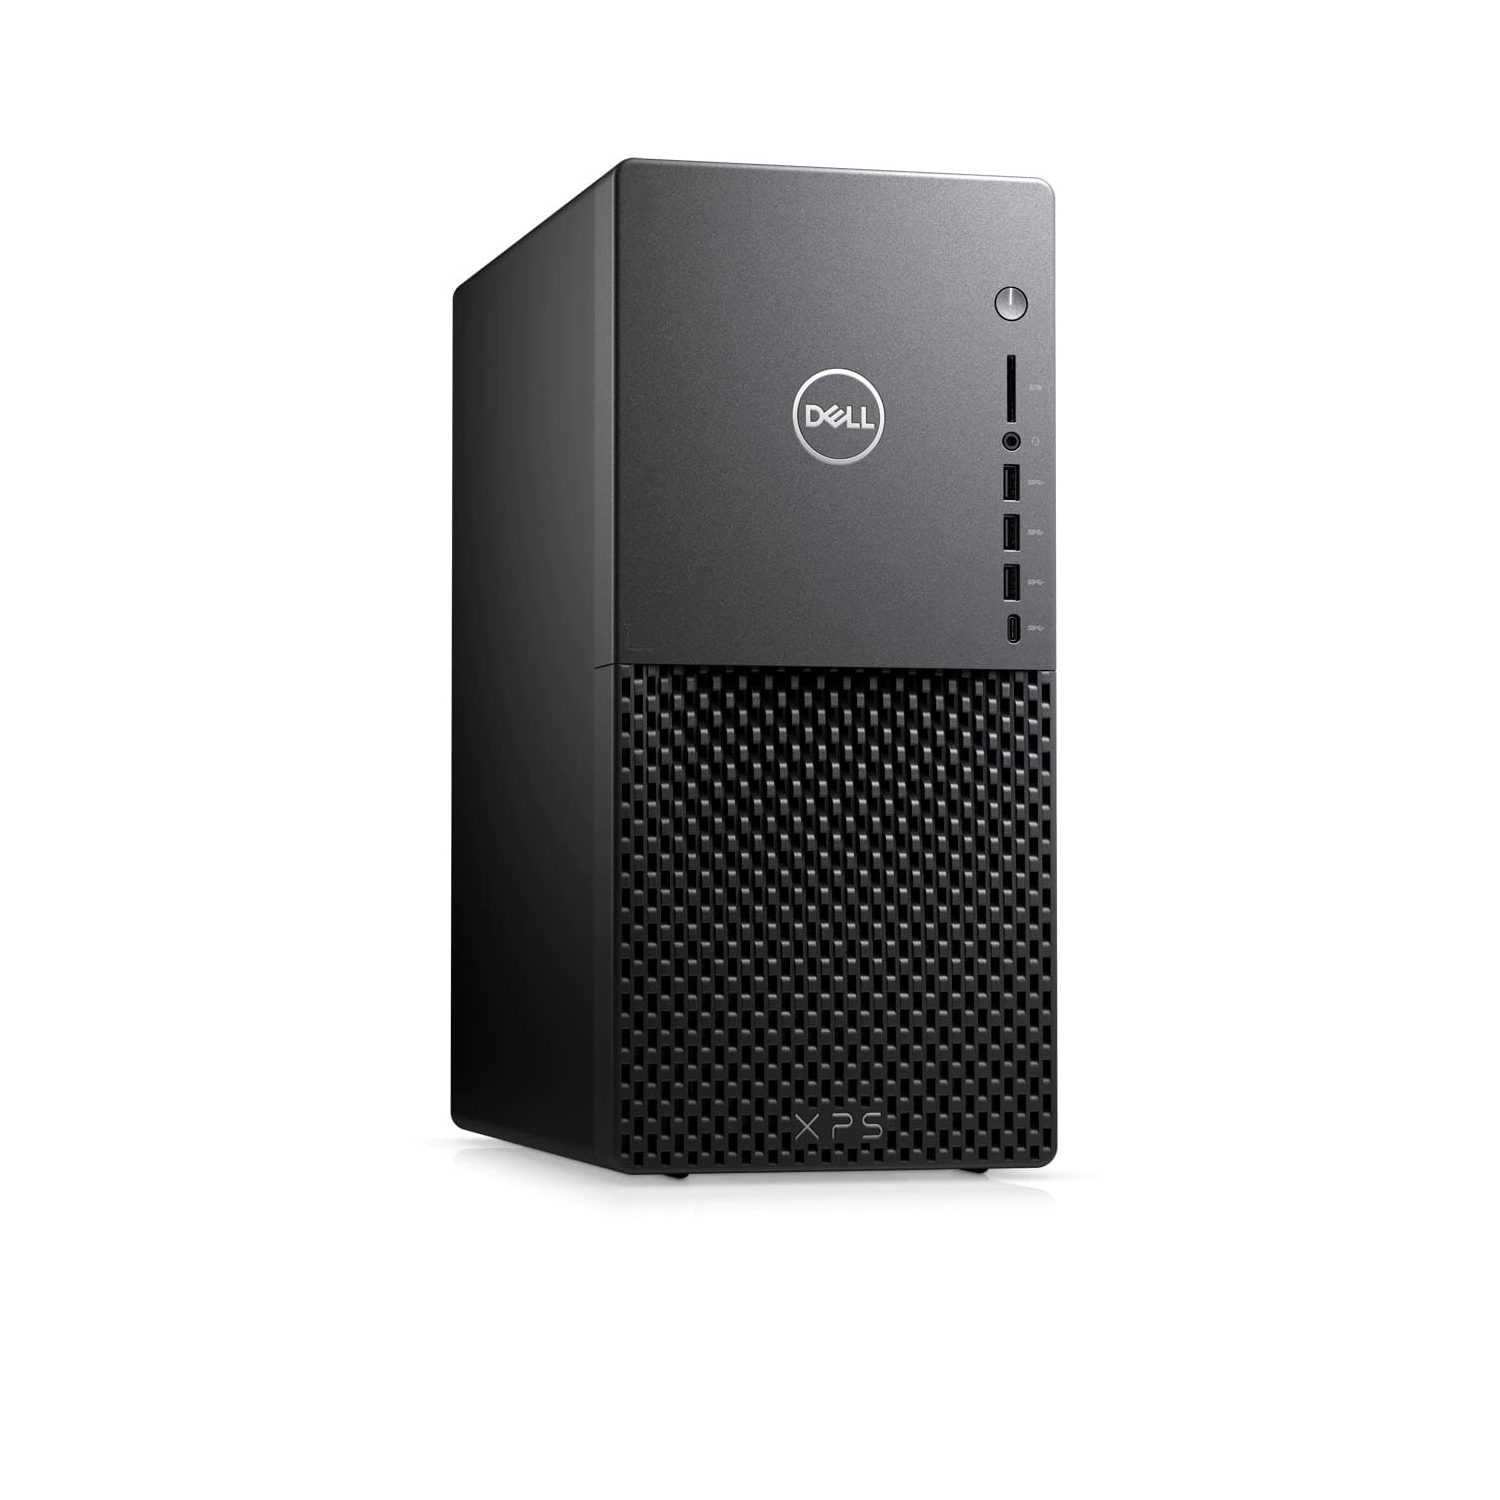 Refurbished (Excellent) - Dell XPS 8940 Desktop (2020) | Core i7 - 1TB HDD + 512GB SSD - 32GB RAM - 3060 Ti | 8 Cores @ 4.9 GHz - 11th Gen CPU Certified Refurbished